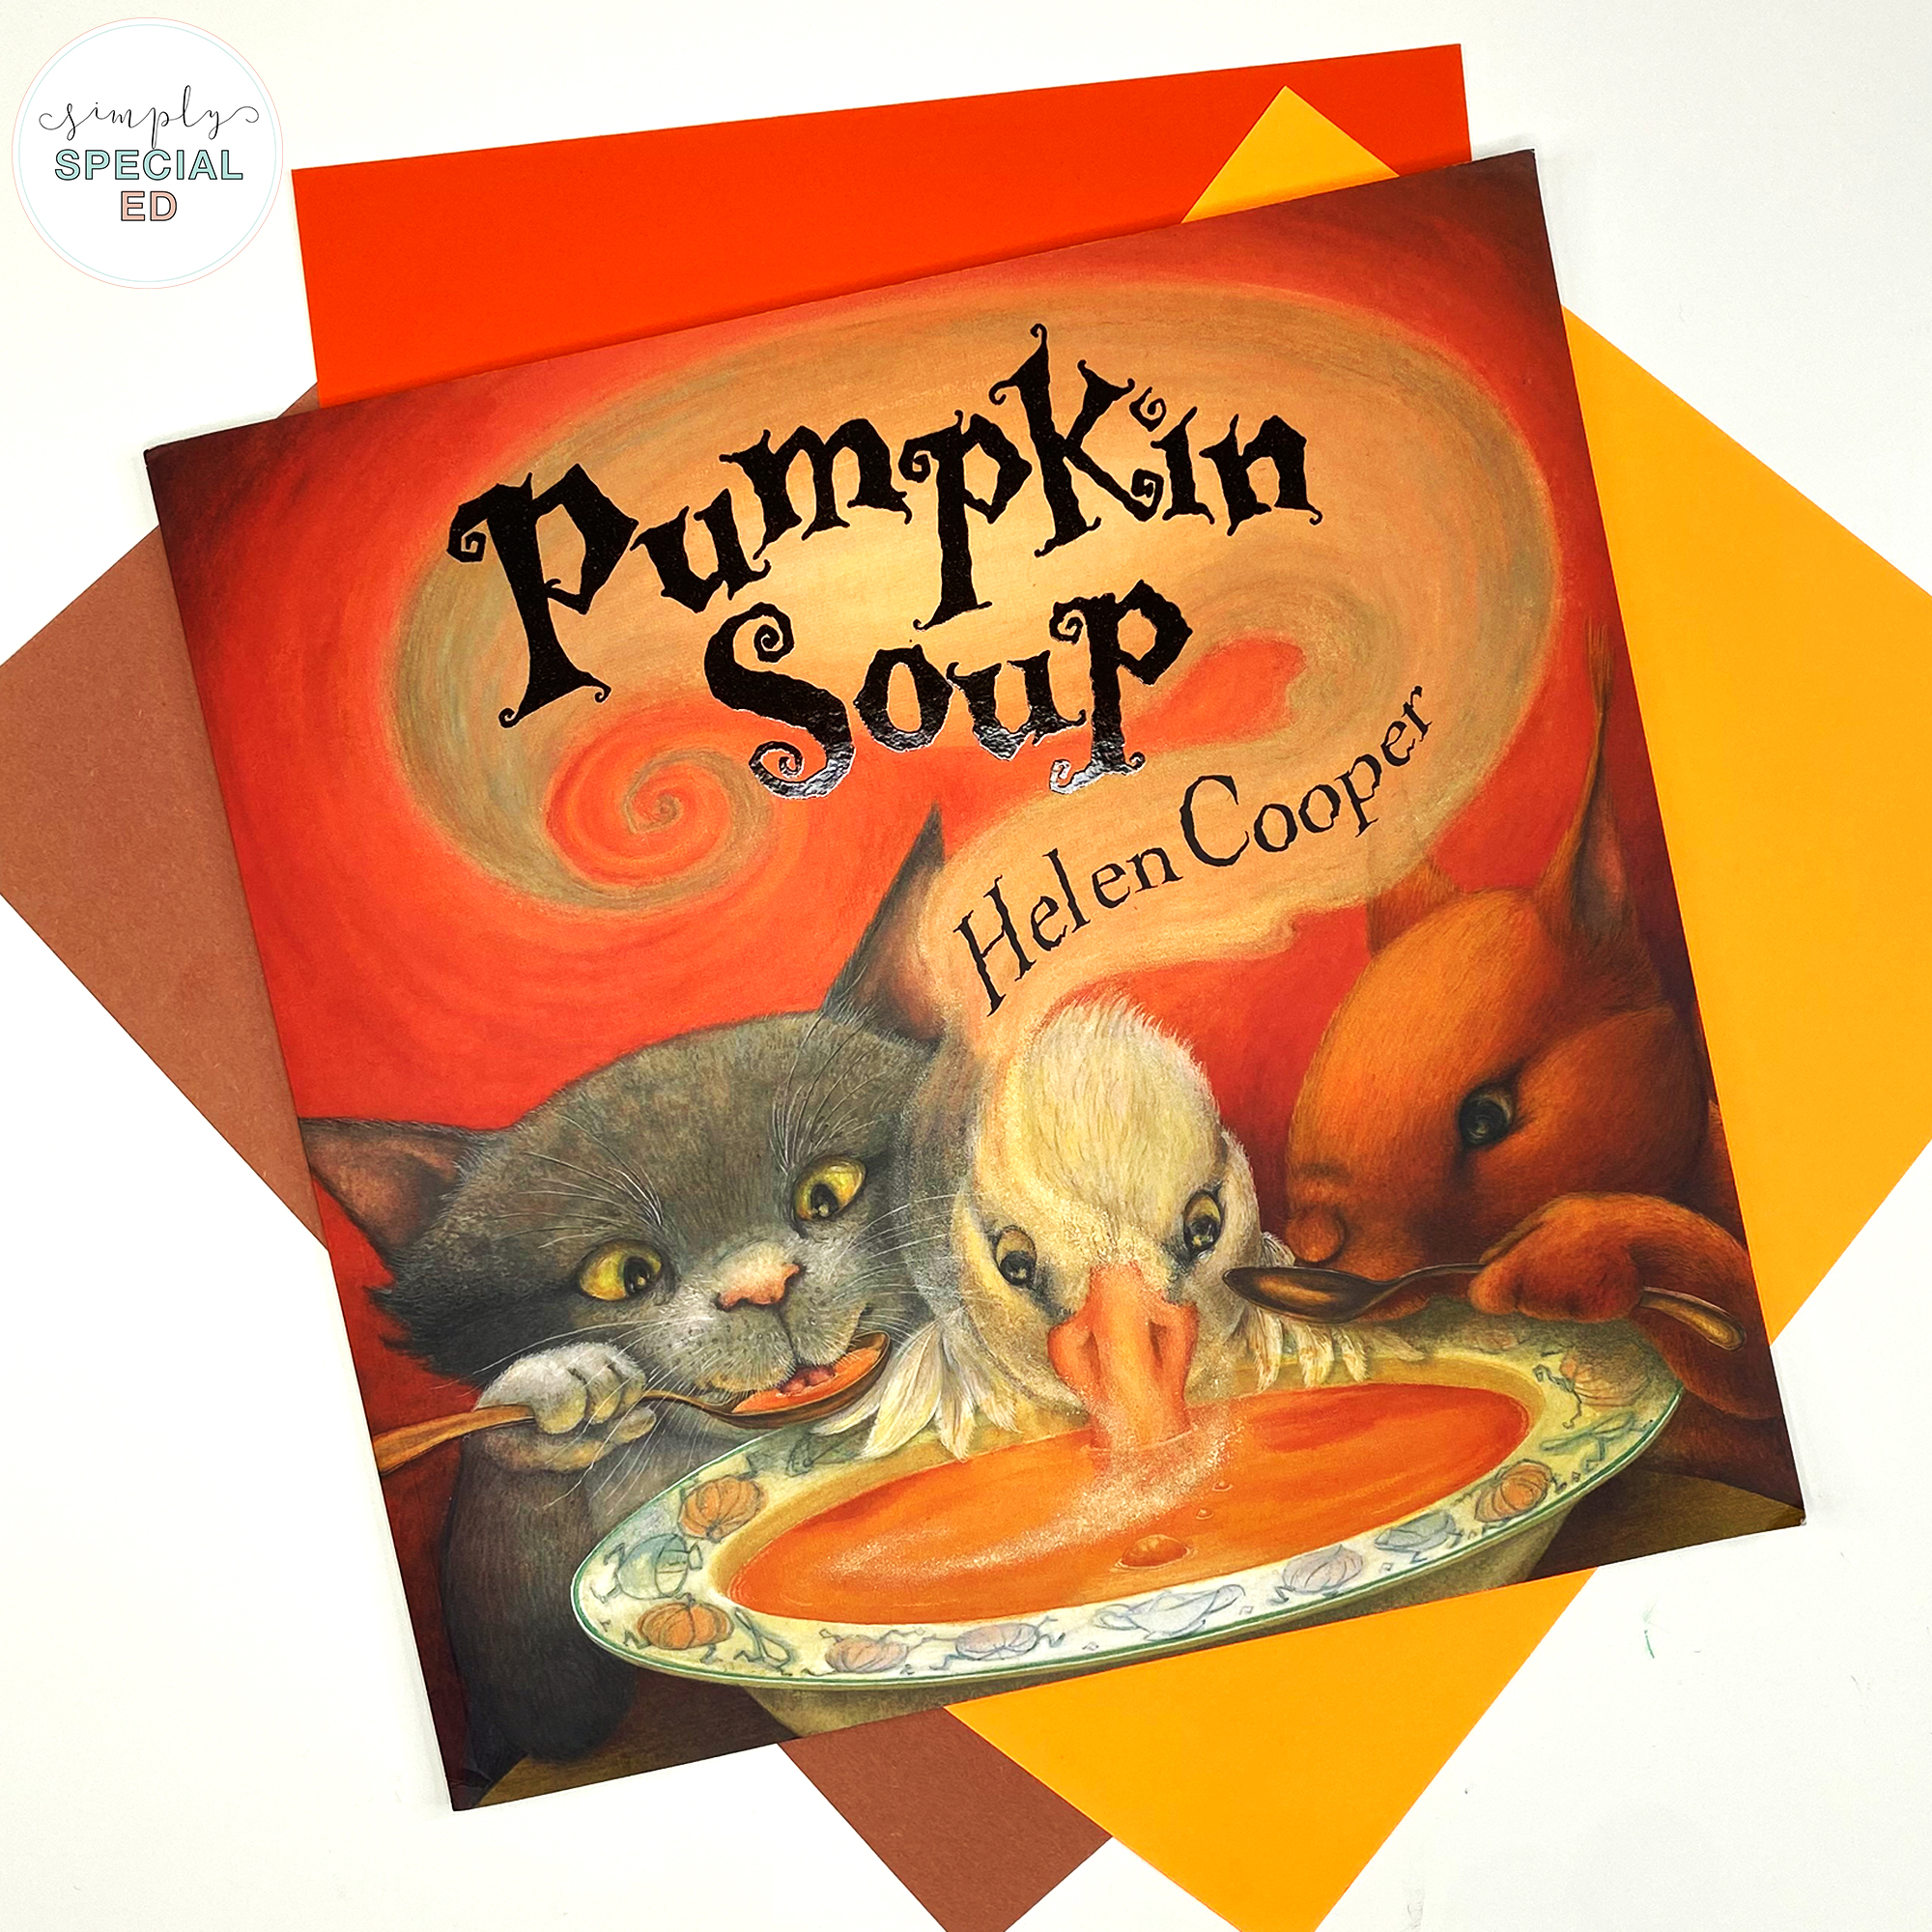 Let’s take a look at some adapted activities included in the Pumpkin Soup Book Companion for your special education classroom.